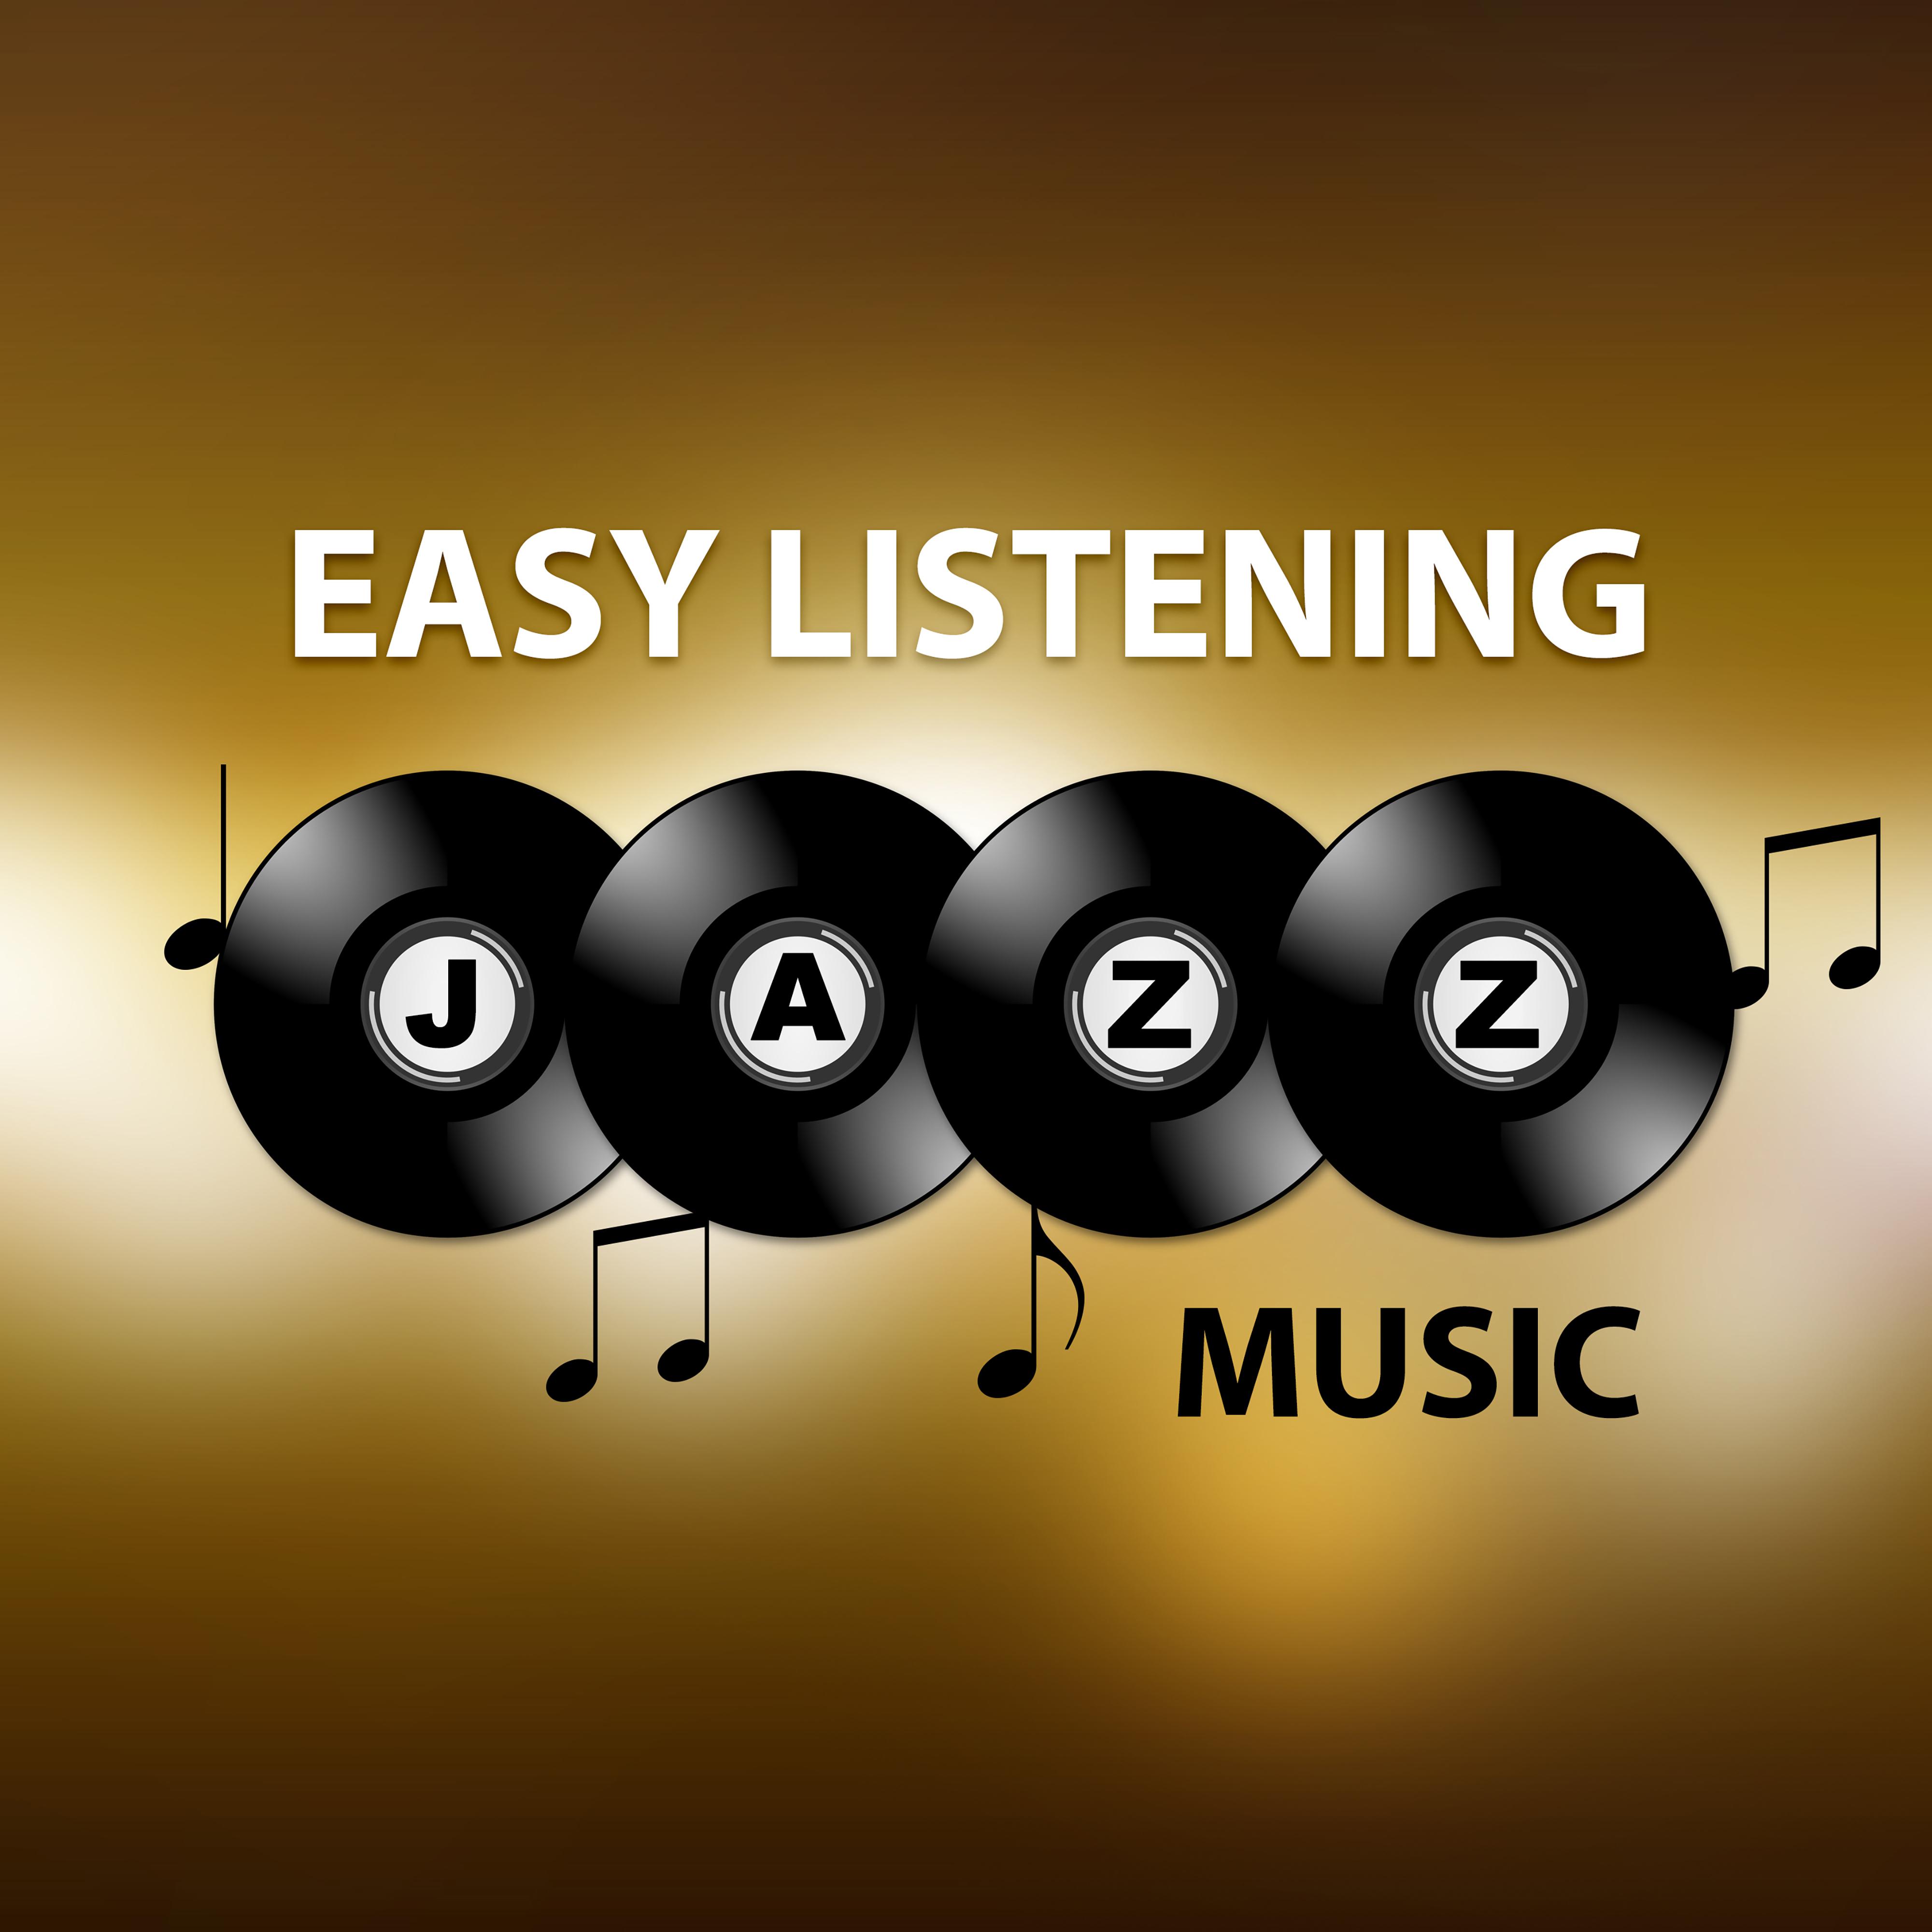 Easy Listening Jazz Music  Relaxing Music, Sounds to Rest, Moonlight Jazz, Mellow Music